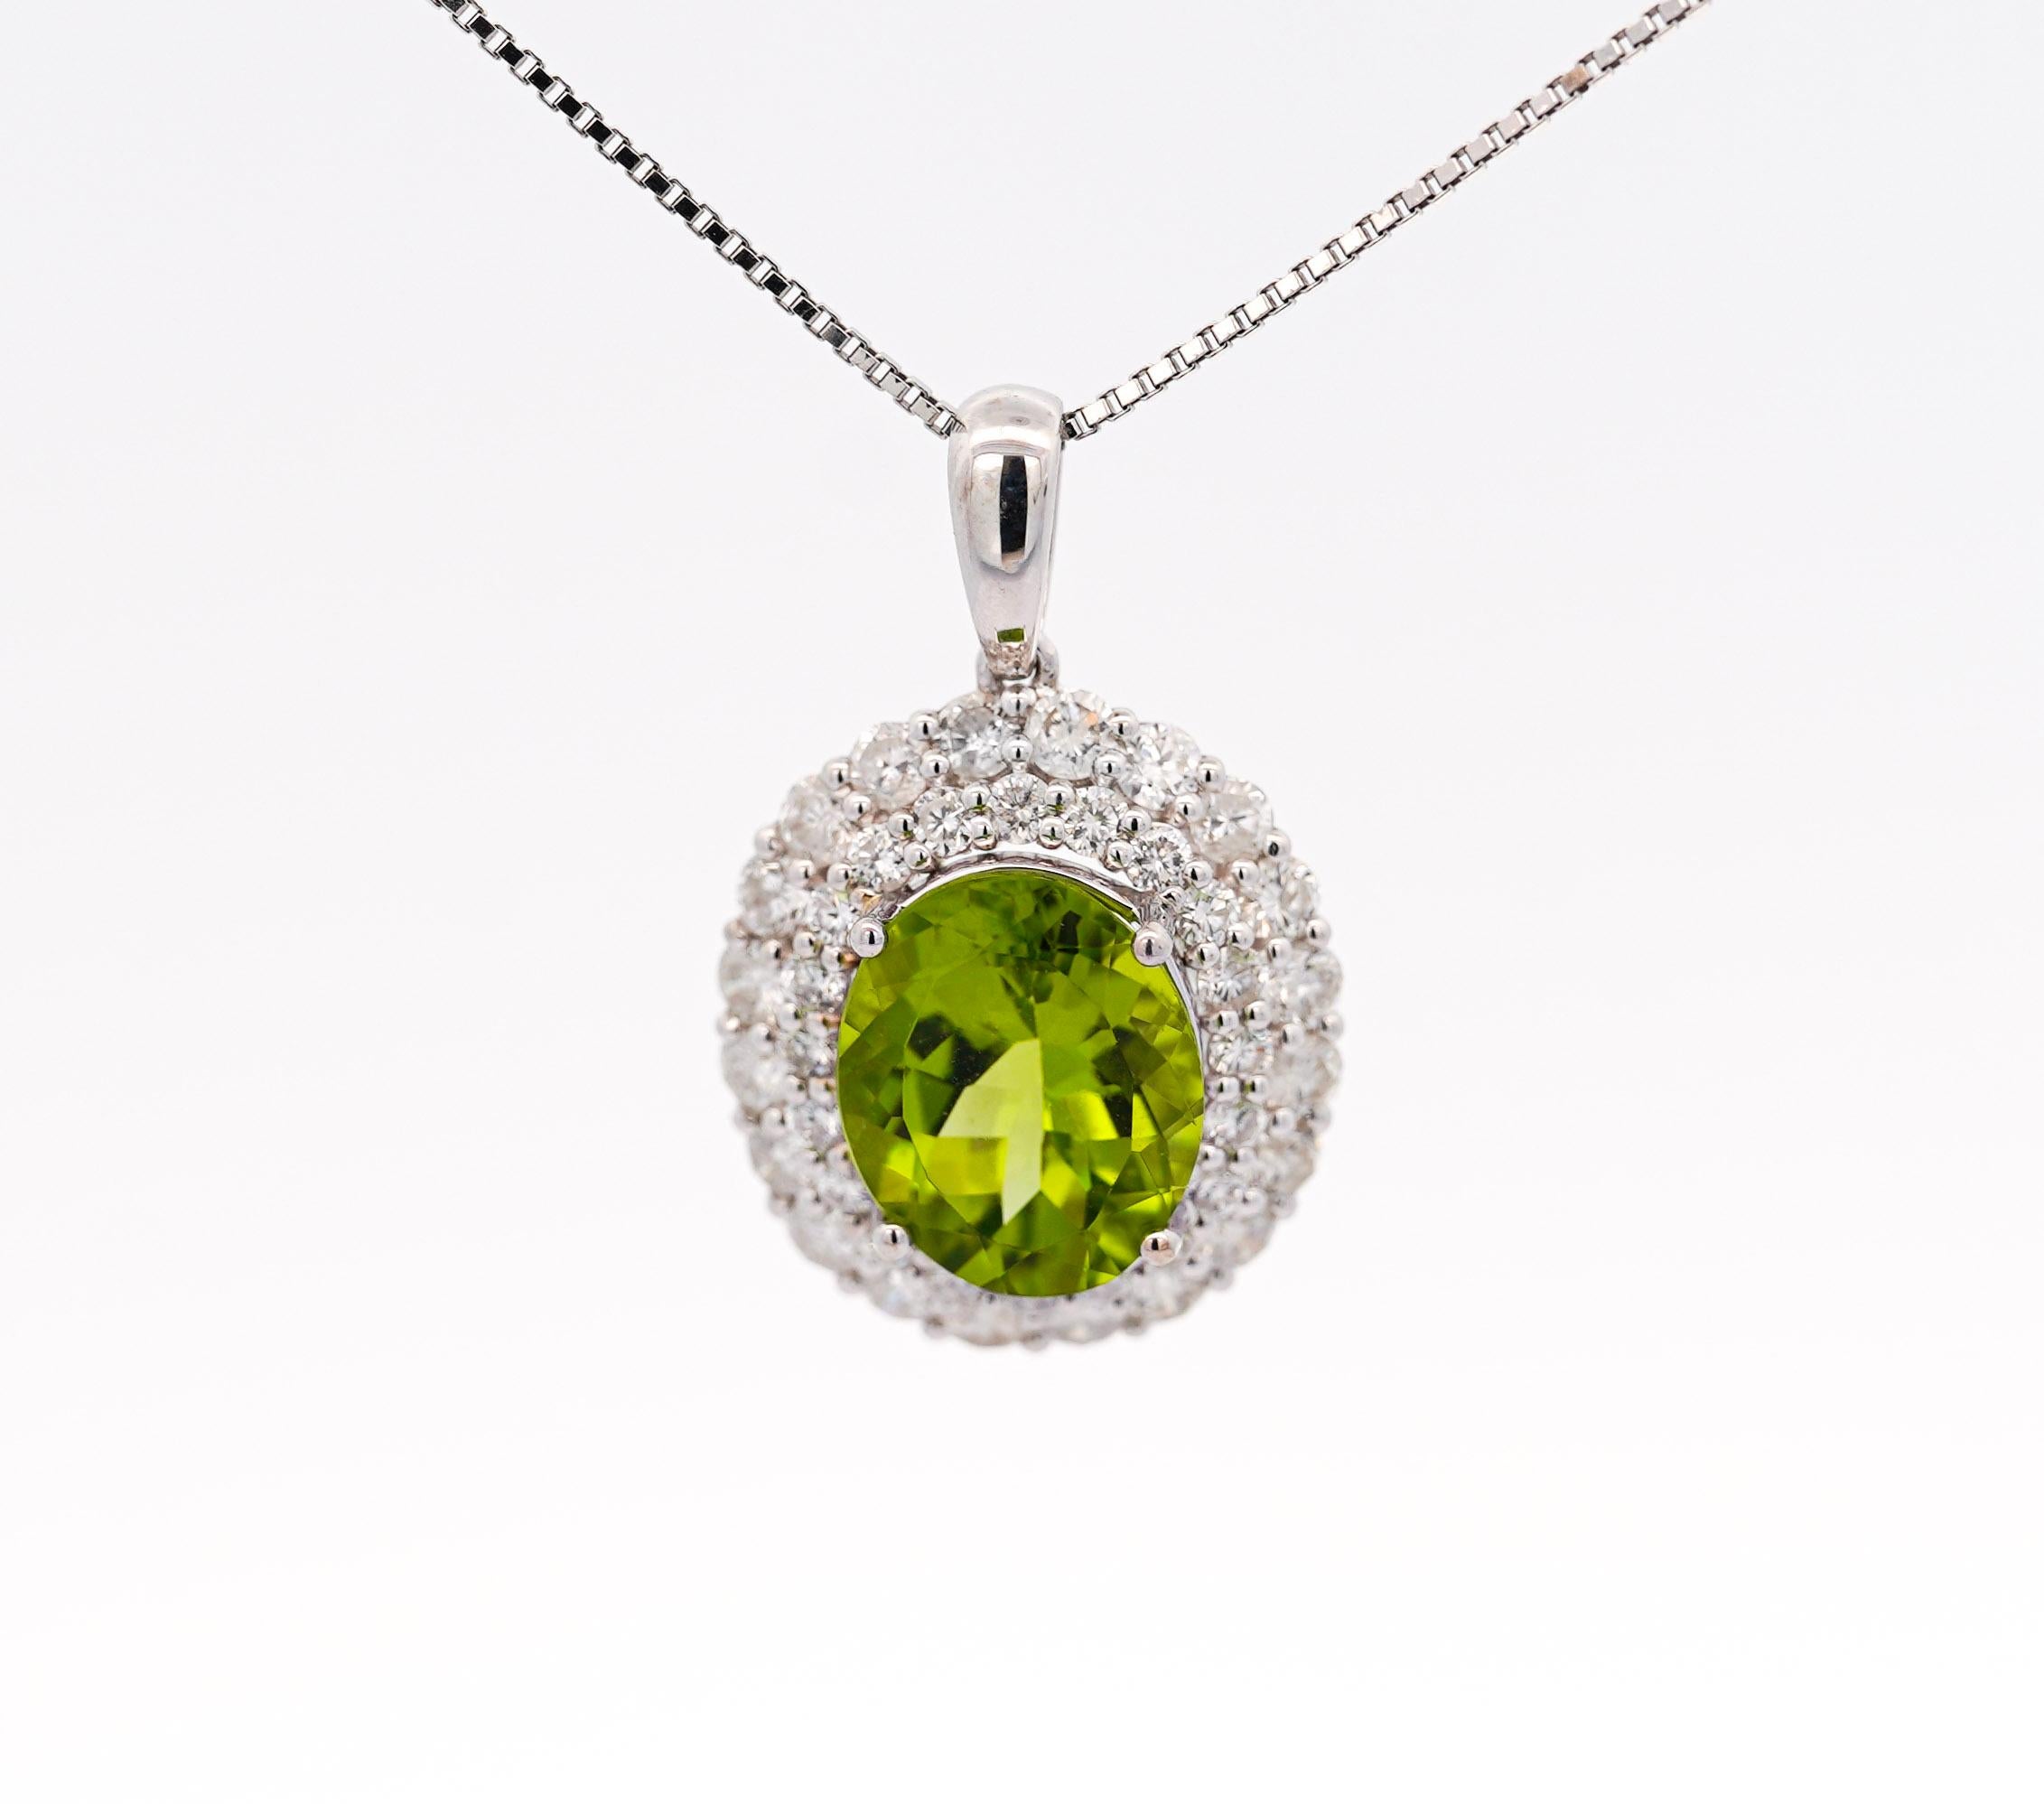 5.03 Carat Oval Peridot Pendant with Round Cut Diamond Halo in 18K White Gold For Sale 1